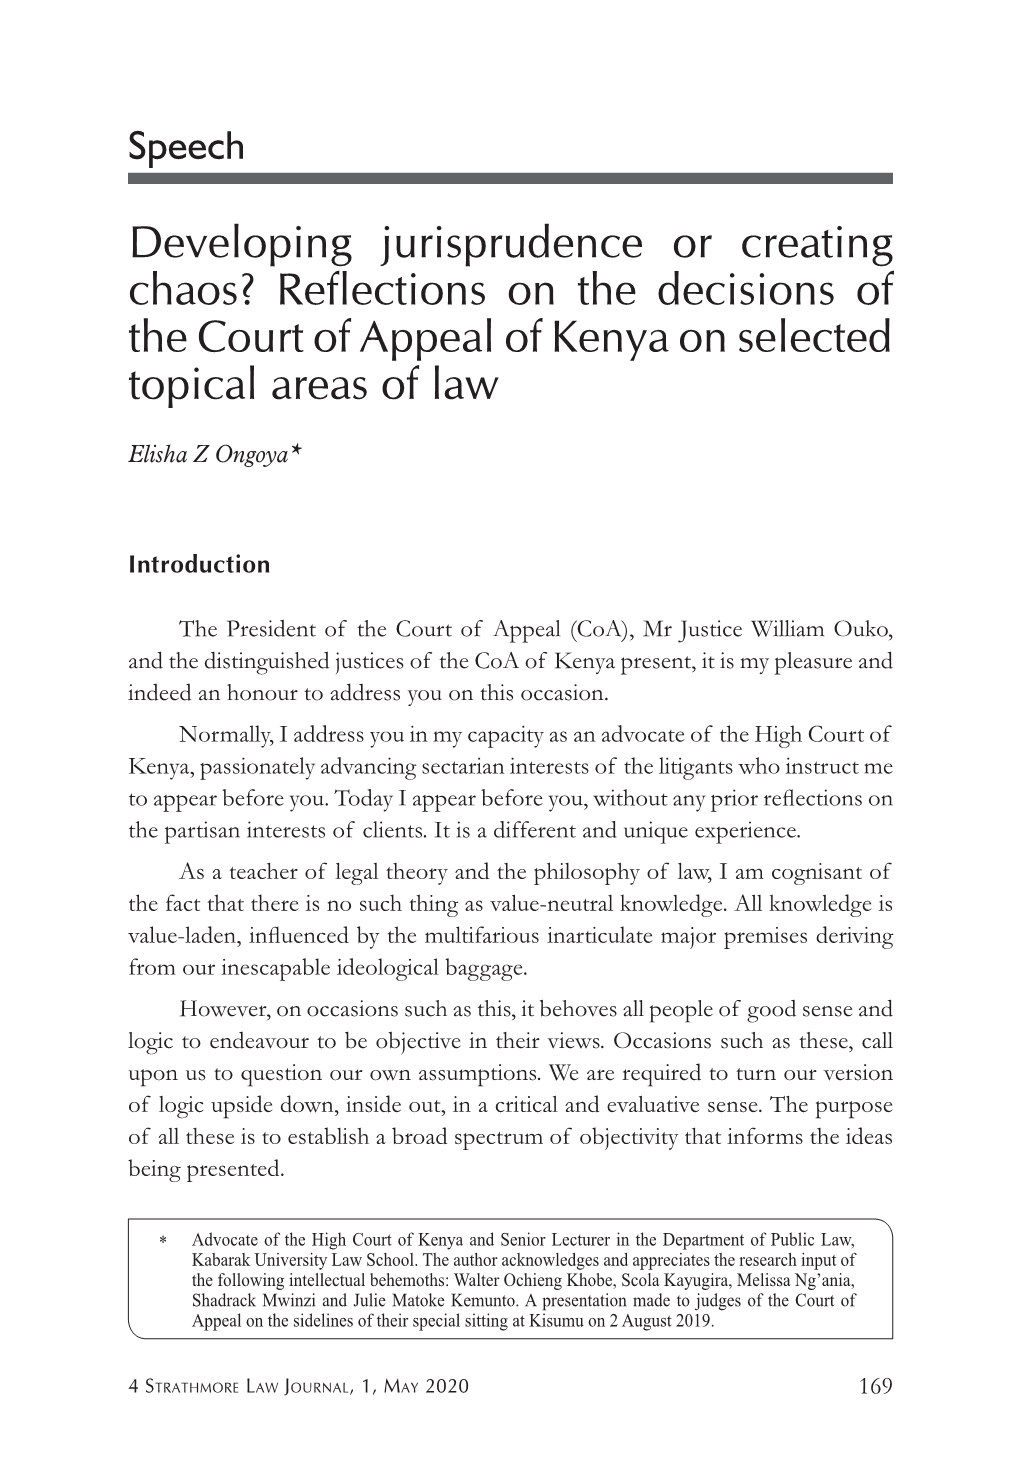 Developing Jurisprudence Or Creating Chaos? Reflections on the Decisions of the Court of Appeal of Kenya on Selected Topical Areas of Law